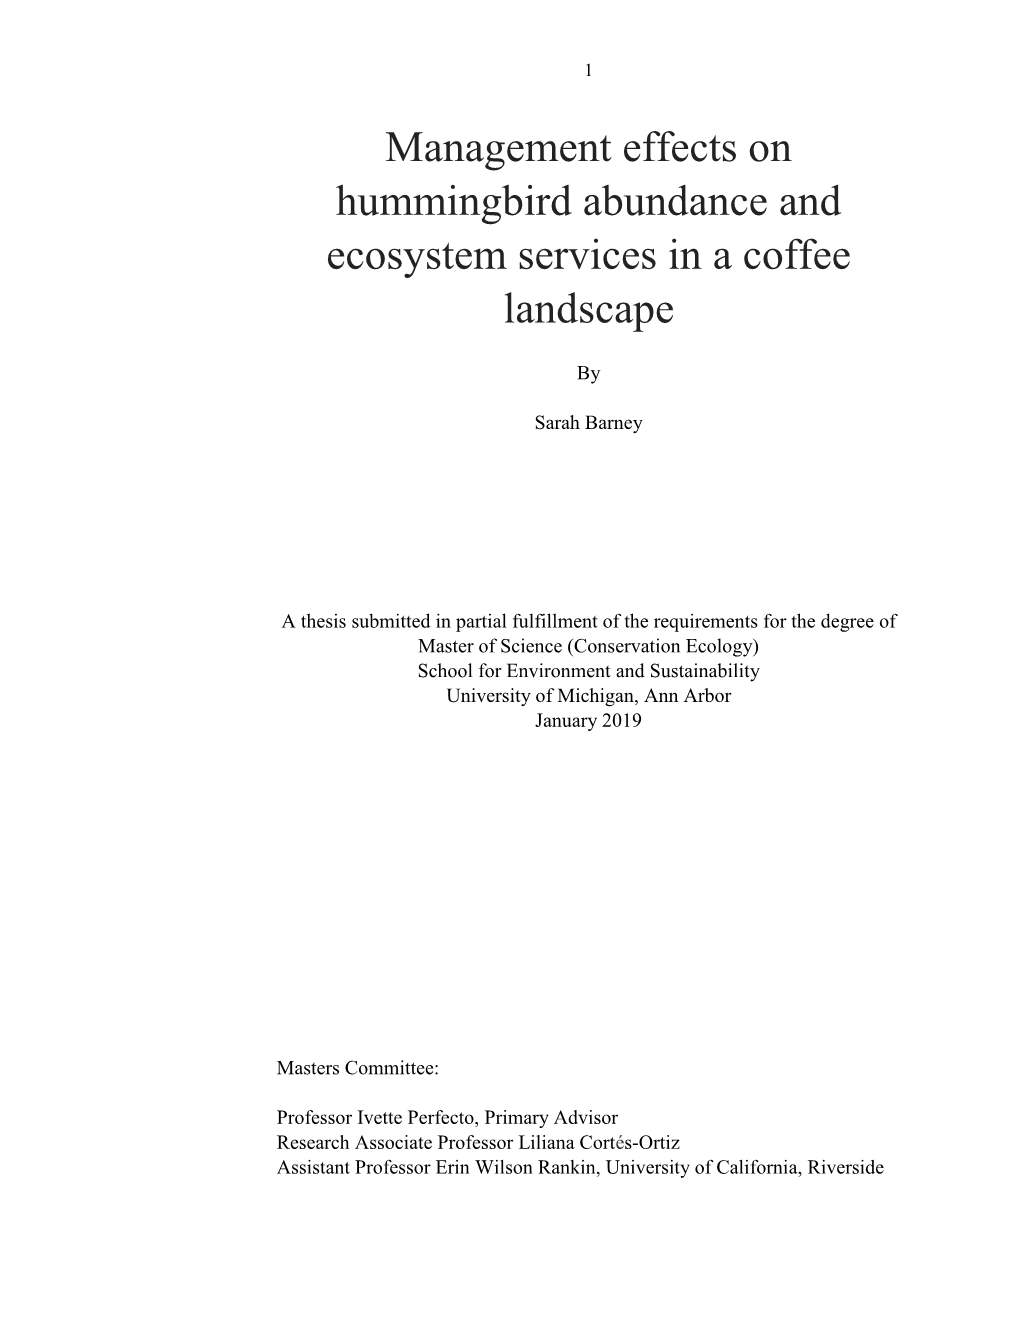 Management Effects on Hummingbird Abundance and Ecosystem Services in a Coffee Landscape